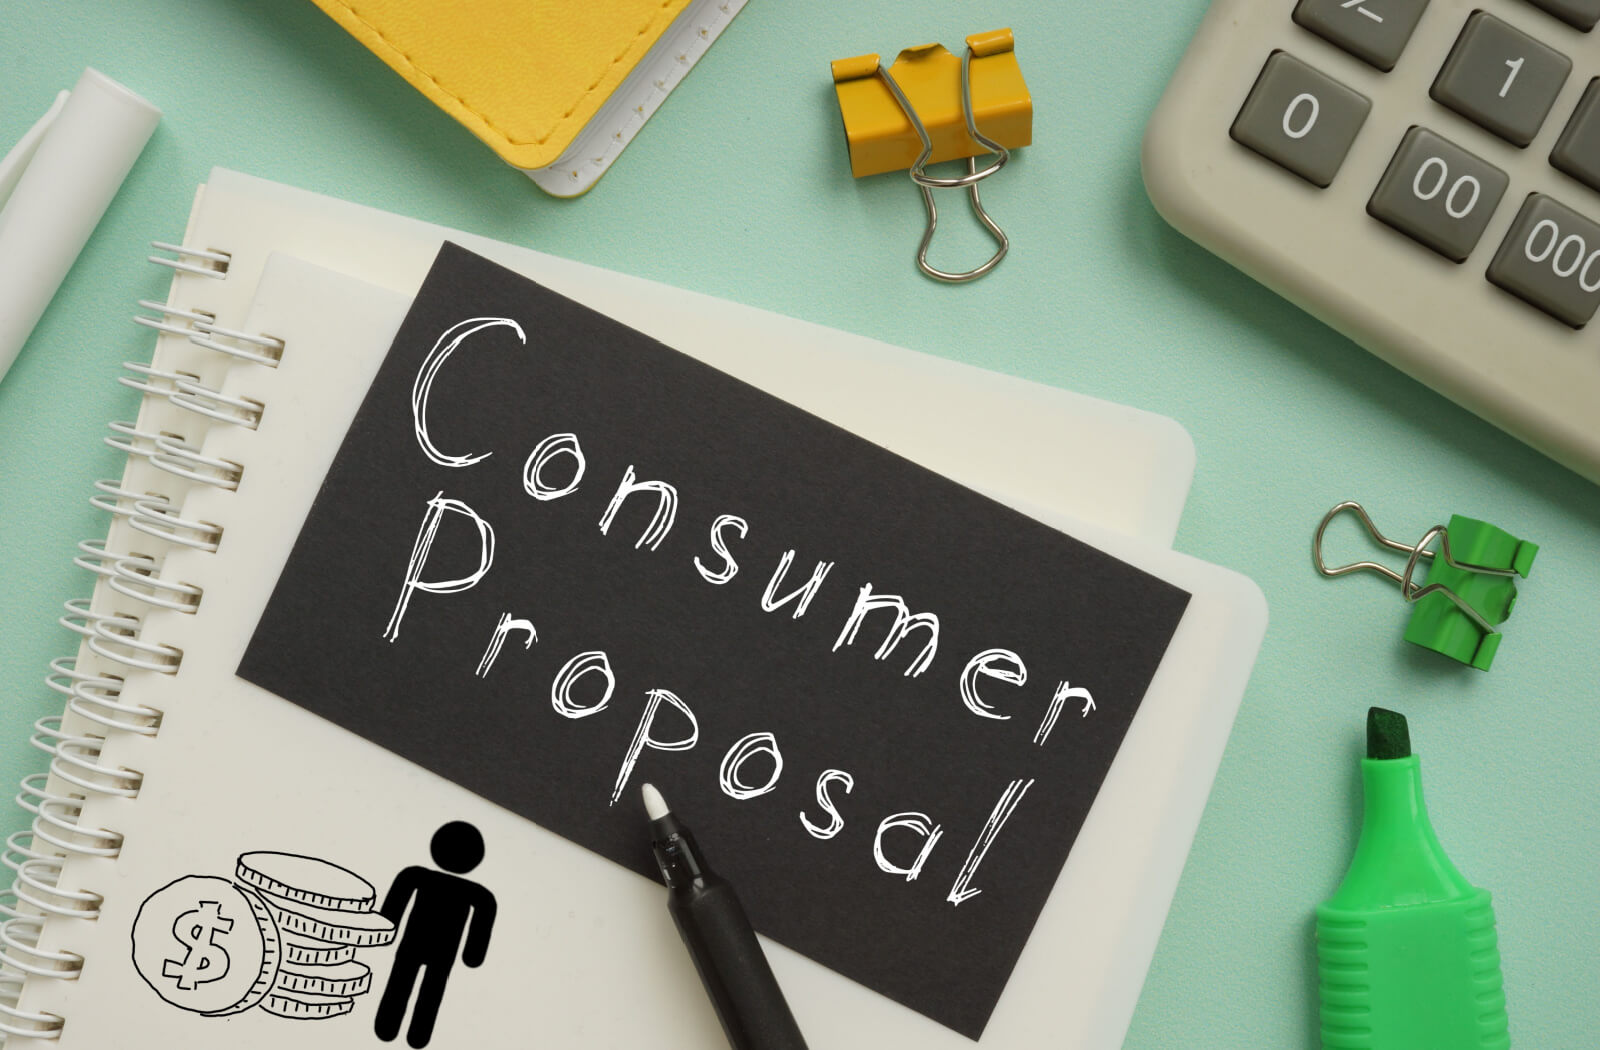 Consumer Proposal is shown on a photo using the text.